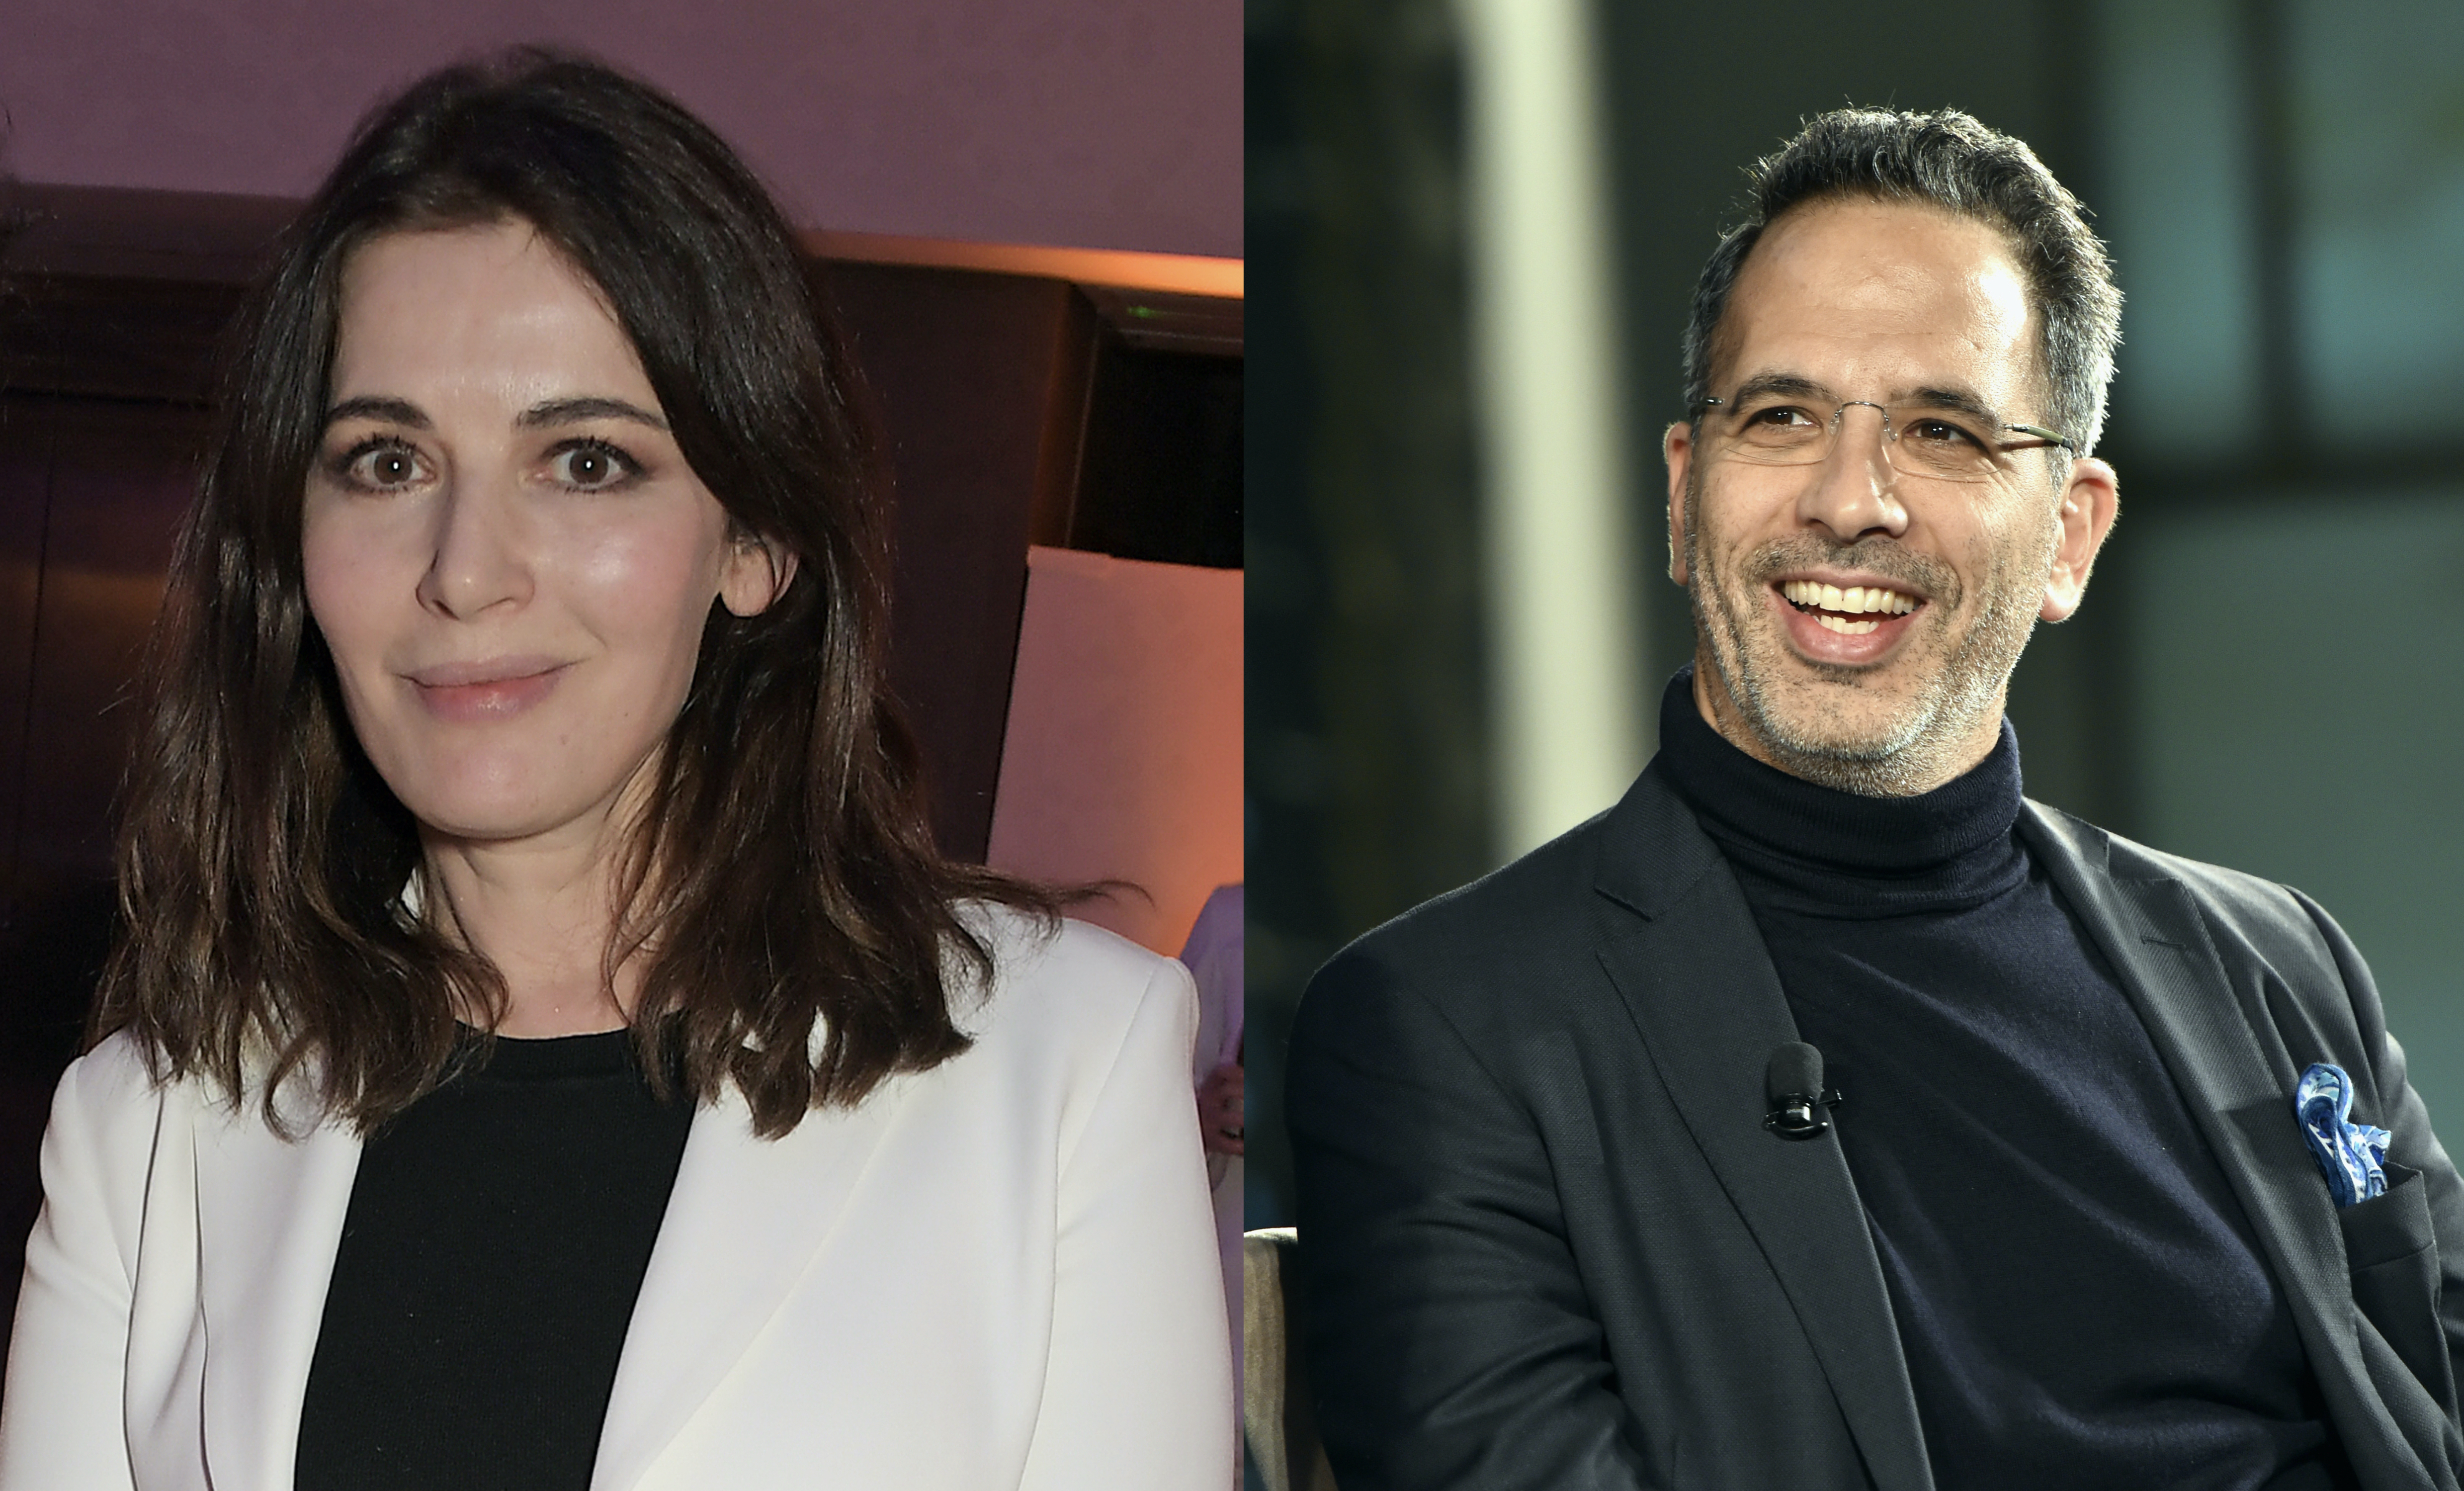 Nigella Lawson and Yotam Ottolenghi side-by-side in a composite photo